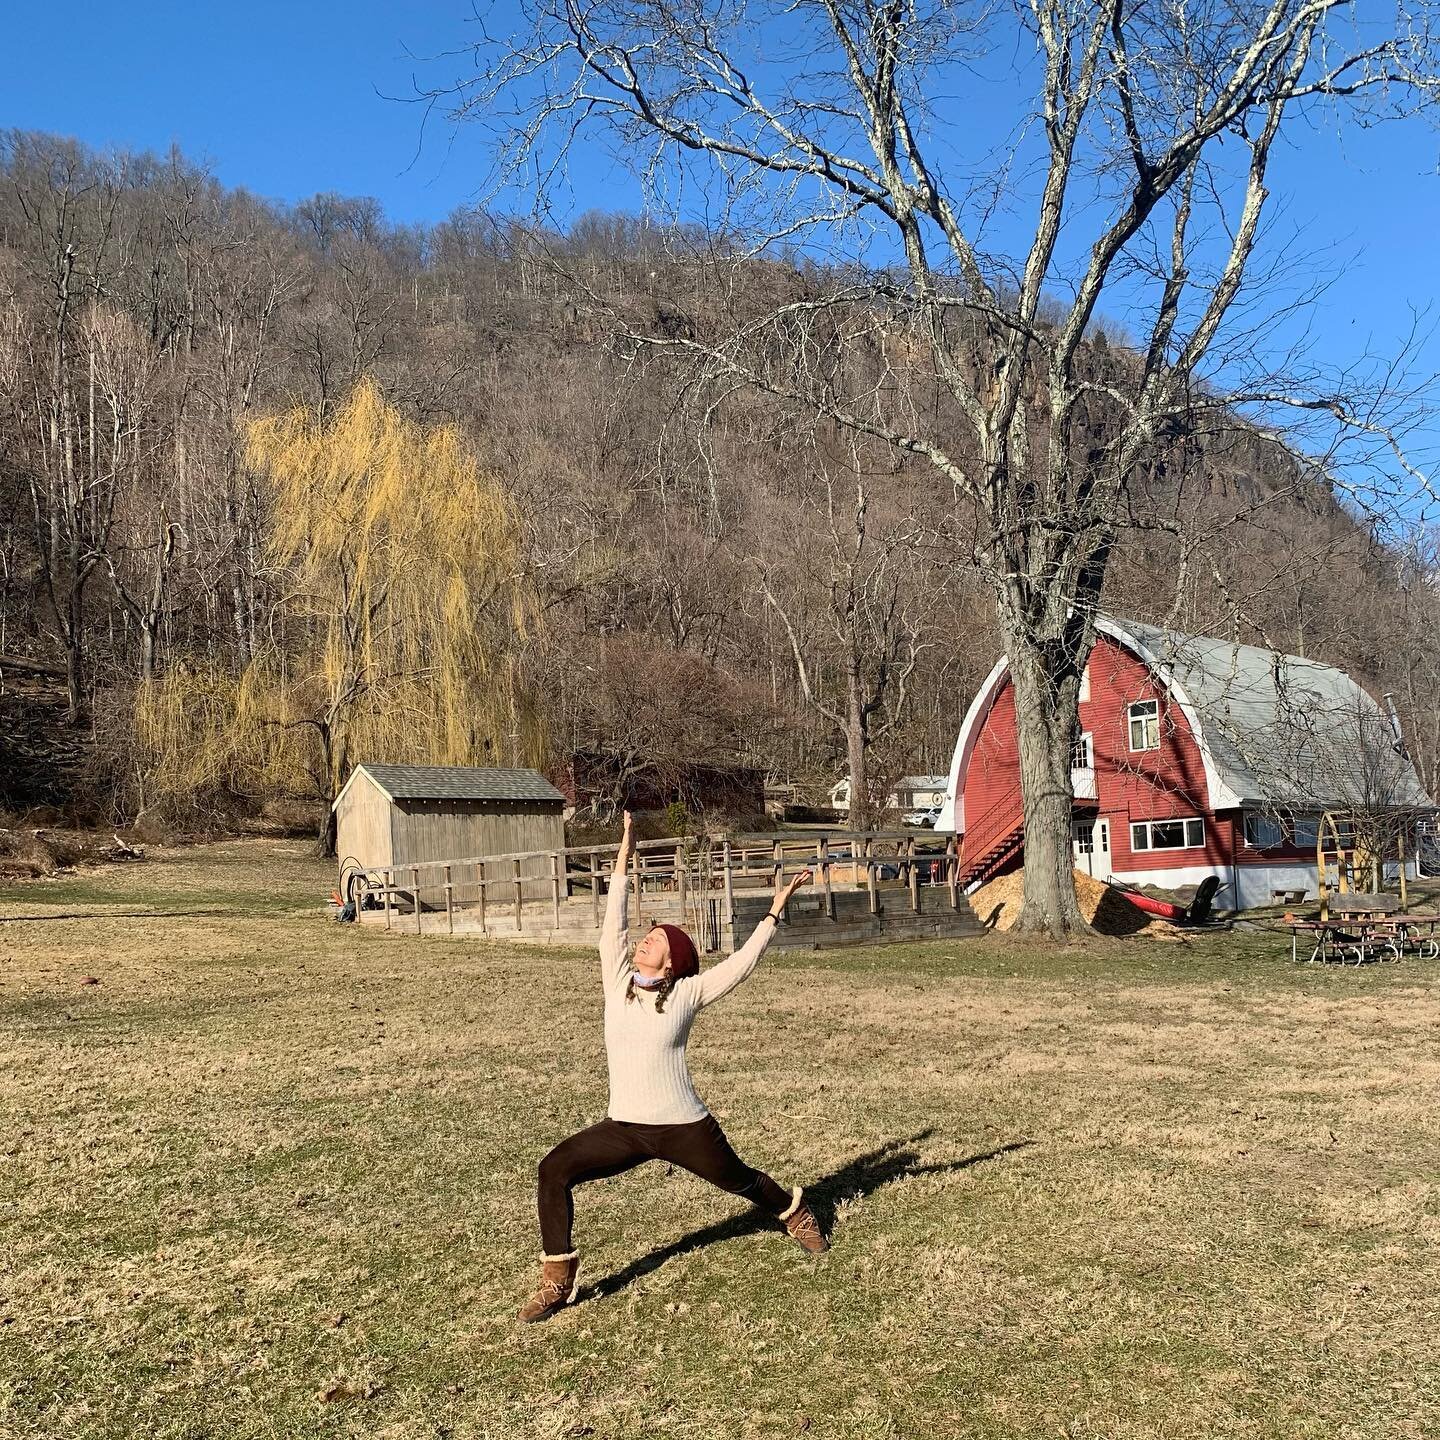 Last year we&rsquo;ve been practicing yoga outdoors into December. Being on the earth is grounding and lots of magic happens around us, like bald eagles landing on the tree with an eel, ravens playing up in the skies, mama deer with fawns grazing in 